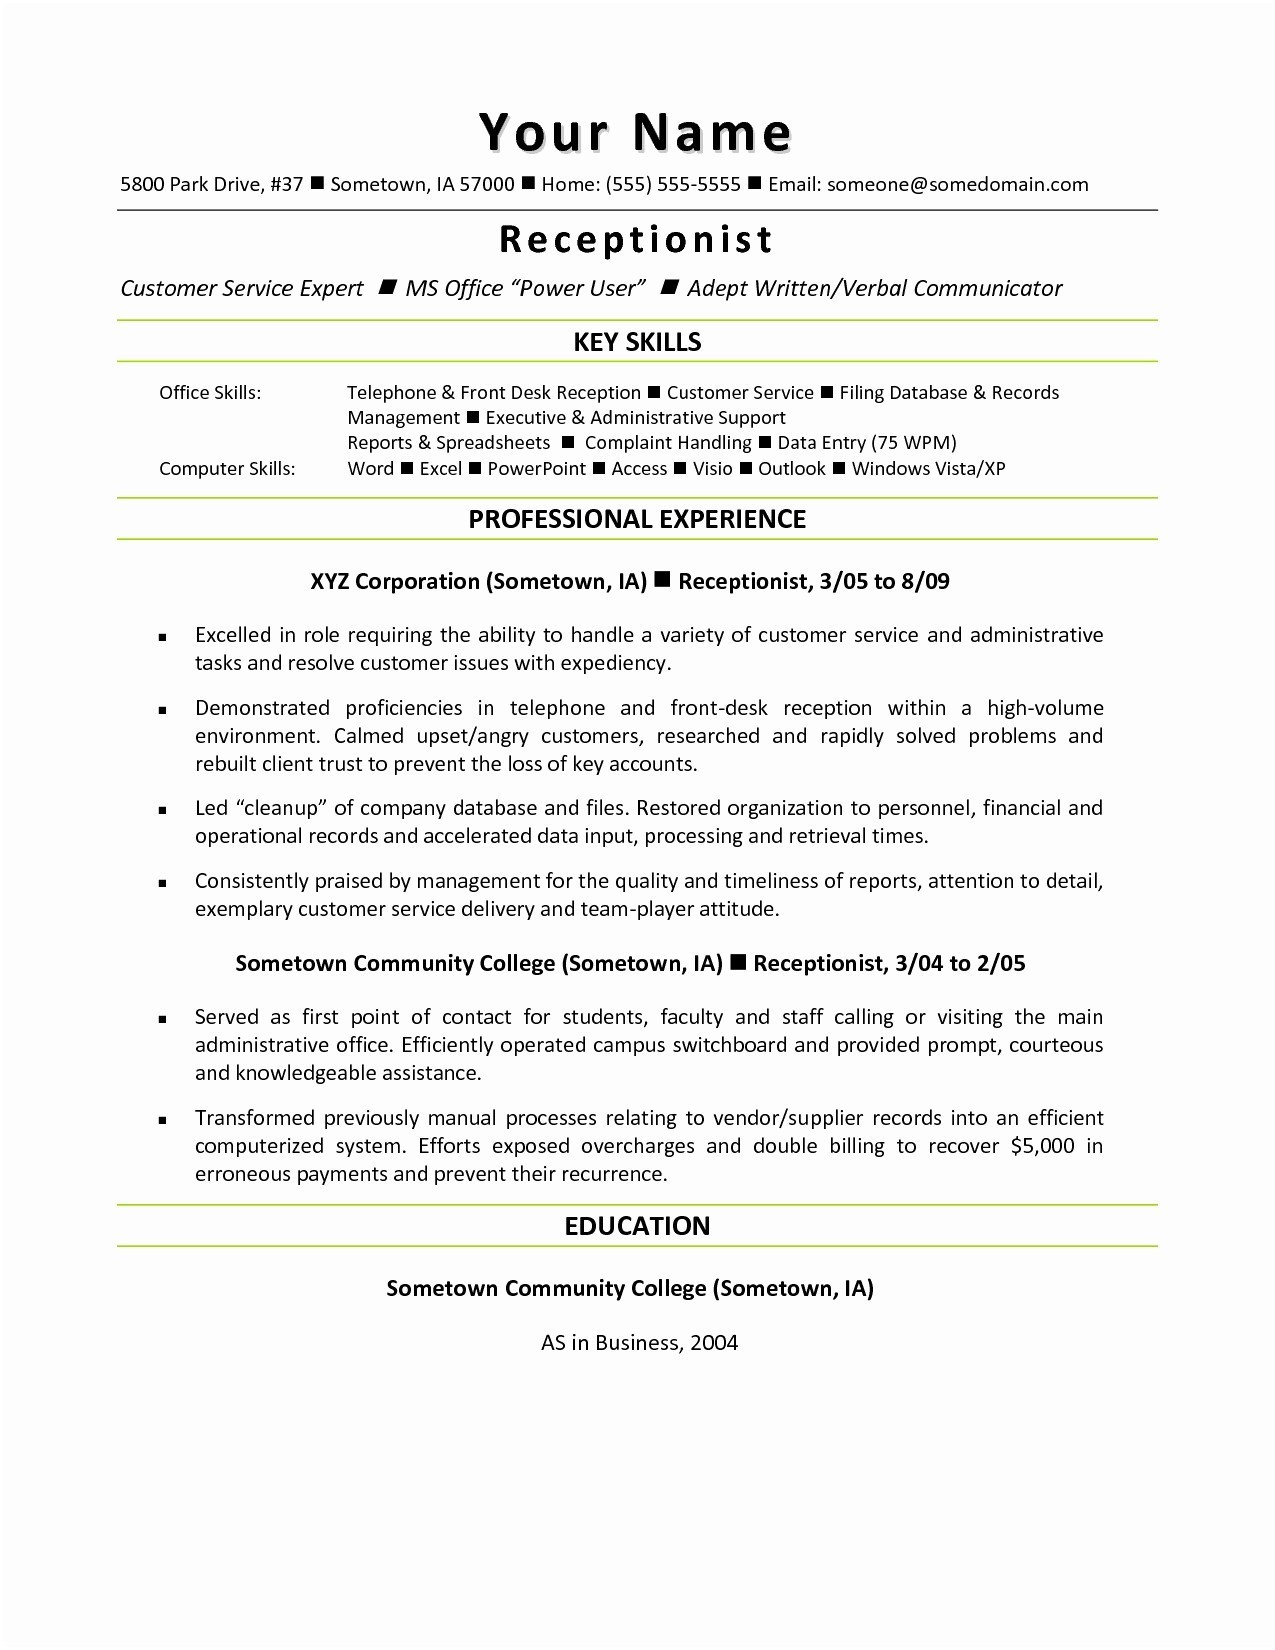 Microsoft Word Letter Of Recommendation Template - Resume Microsoft Word Fresh Resume Mail format Sample Fresh